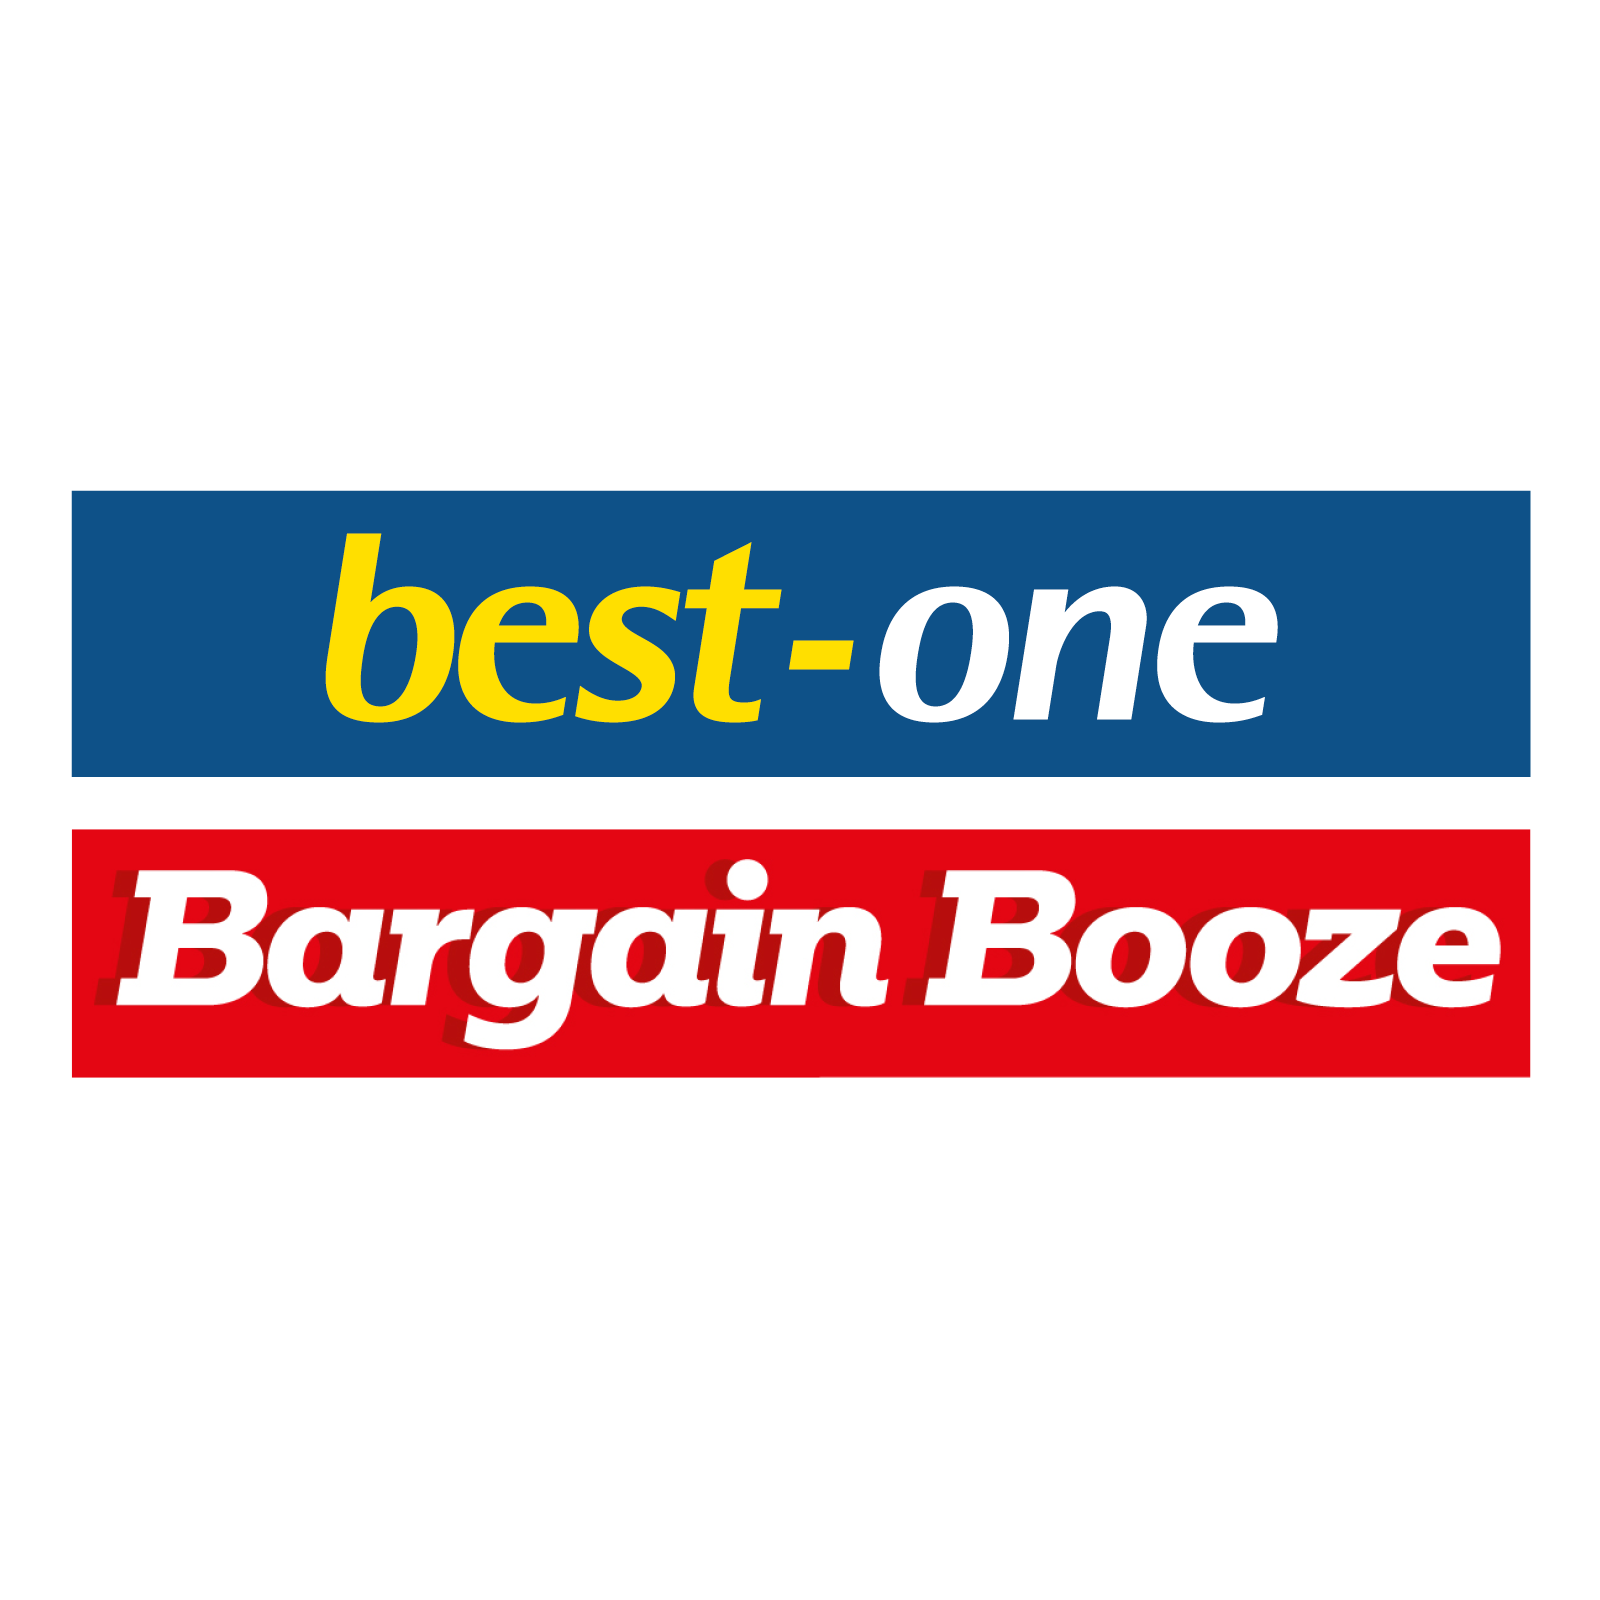 Best-one featuring Bargain Booze - Kingswood, Bristol BS15 4QT - 01179 672322 | ShowMeLocal.com